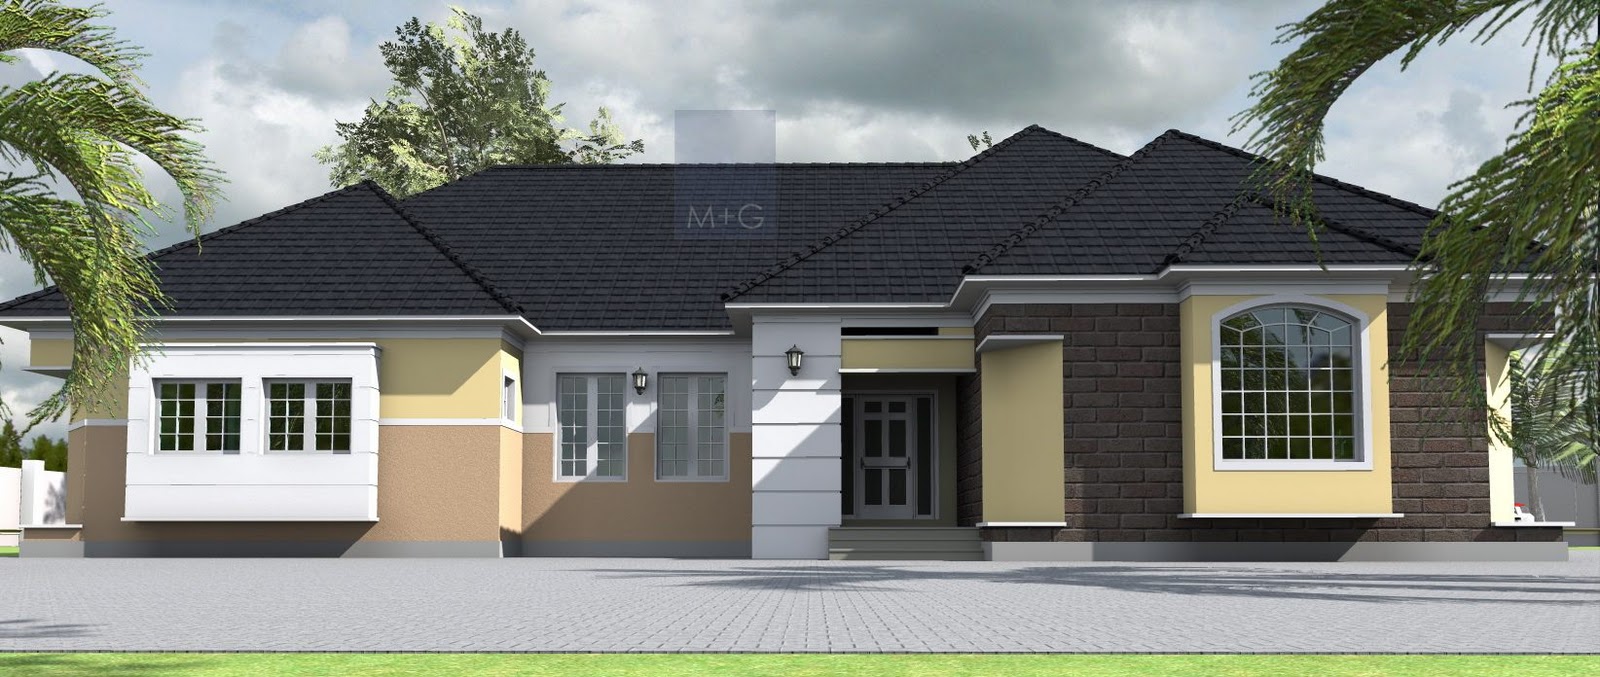  Contemporary  Nigerian Residential Architecture 4  bedroom  